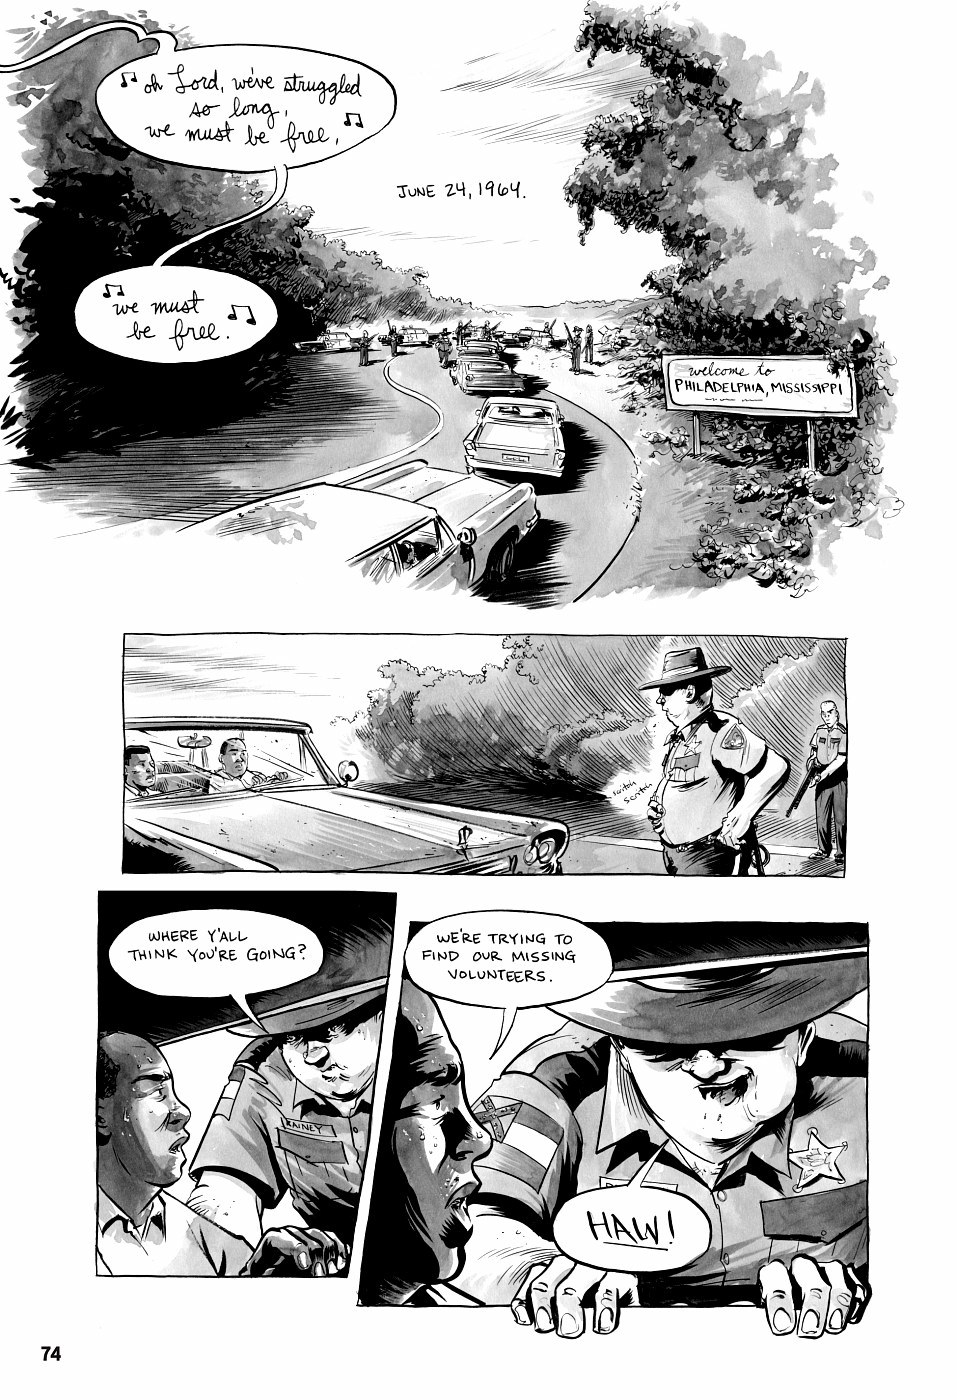 page 74 of march book three graphic novel